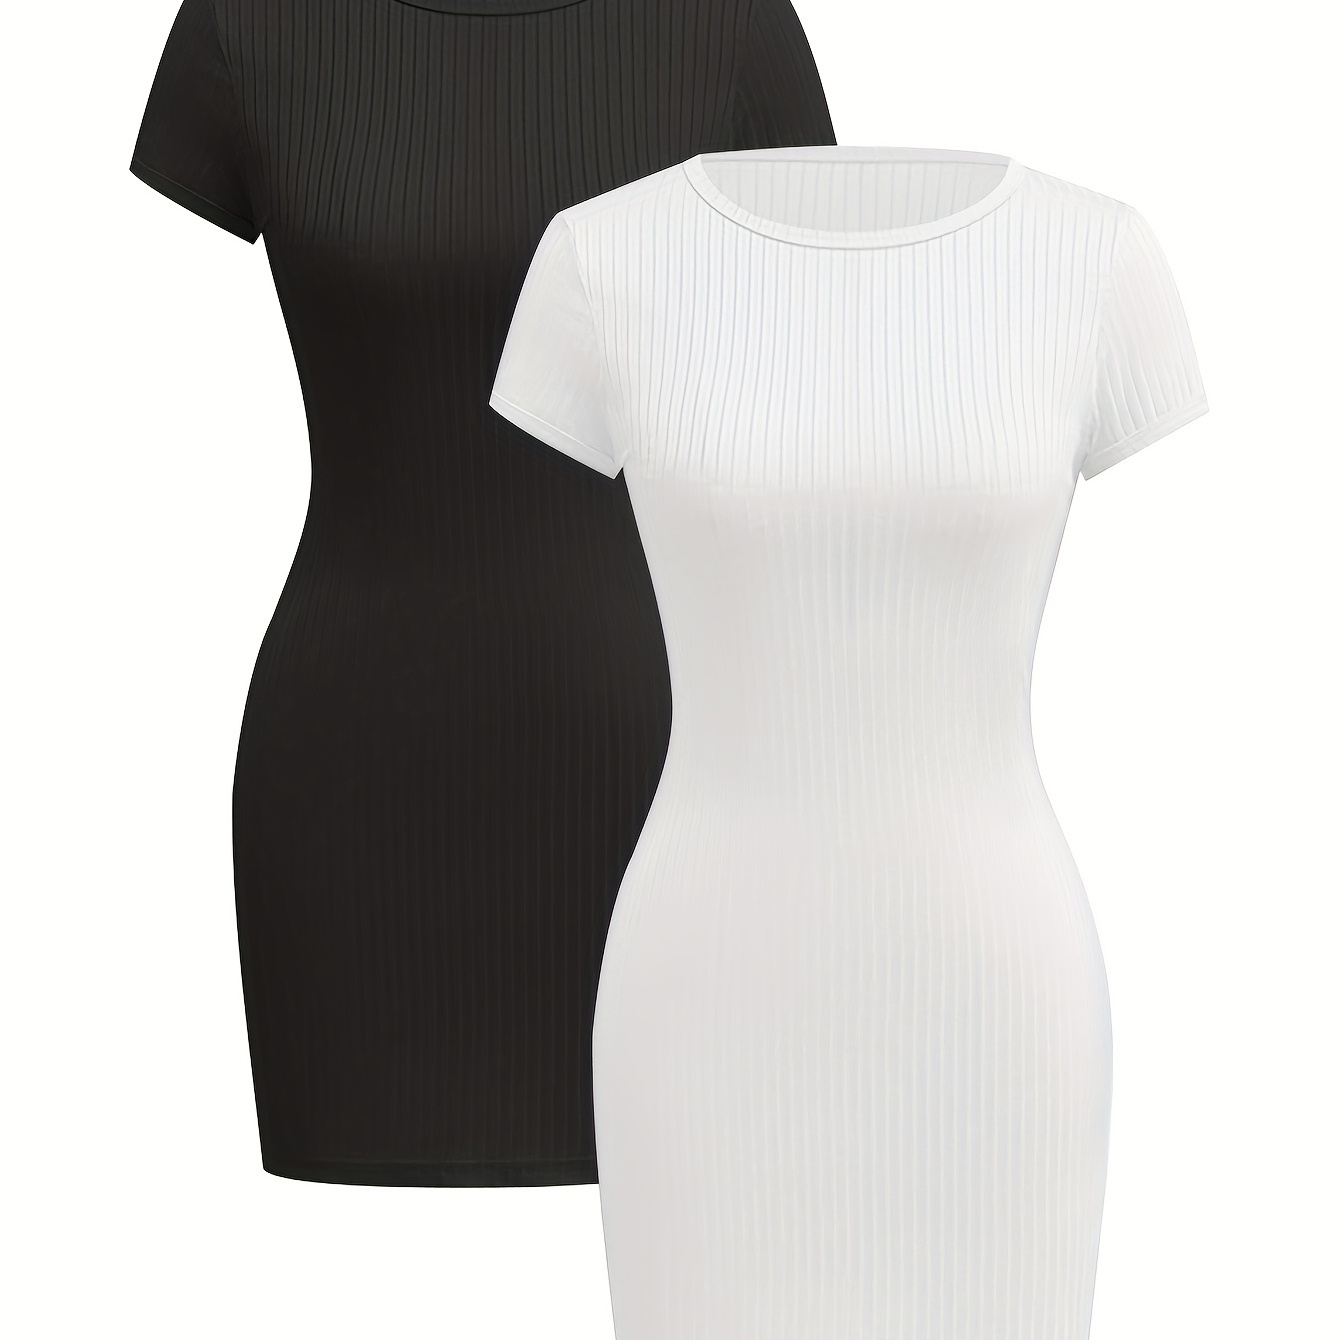 

Rib Knit Tee Dress 2 Pack, Sexy Bodycon Crew Neck Dress For Every Day, Club, Party, Women's Clothing